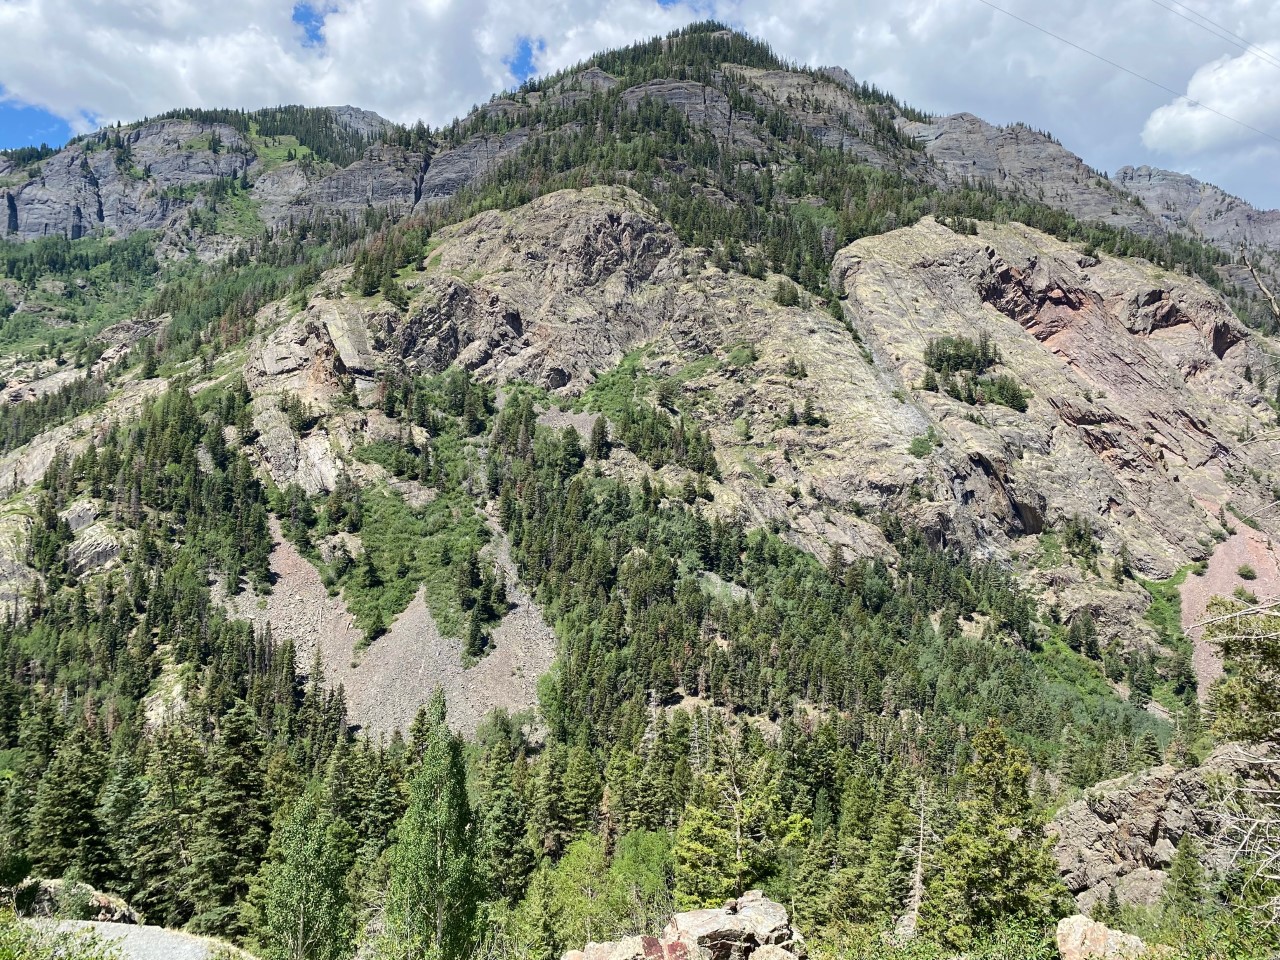 More views of the terrain from a stop along the Million Dollar Highway. Still on way to Ouray.